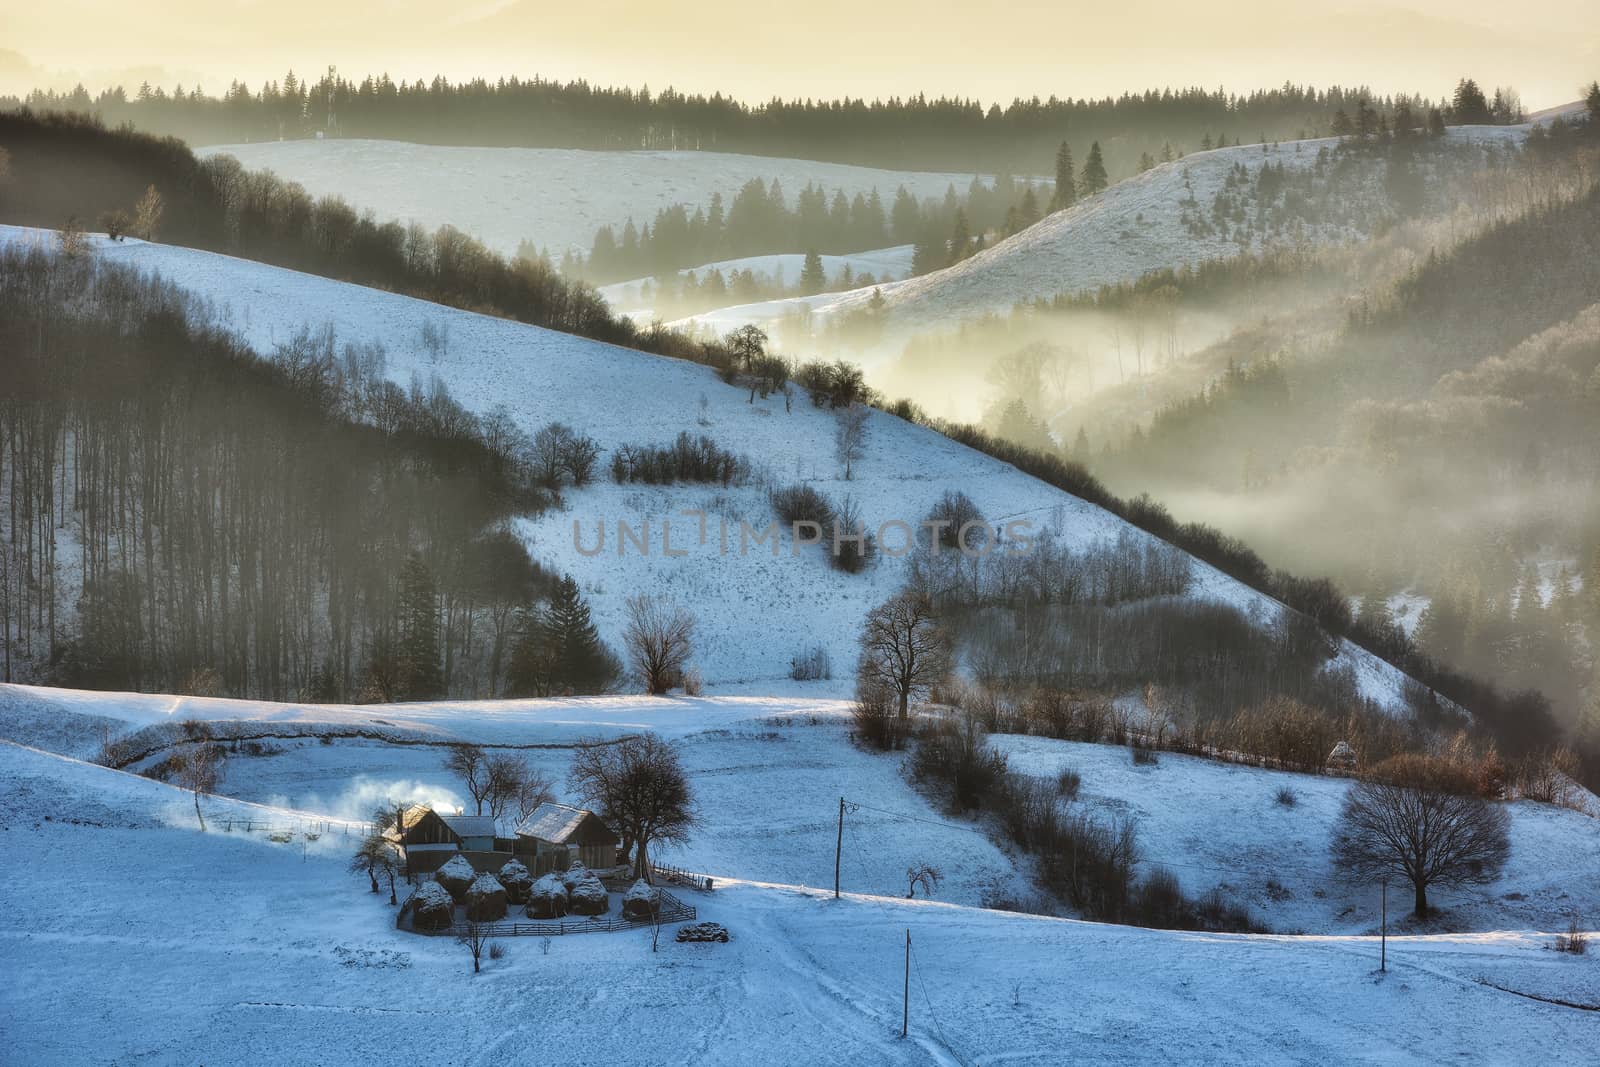 Frozen sunny day of a winter, on wild transylvania hills. Holbav. Romania. Low key, dark background, spot lighting, and rich Old Masters